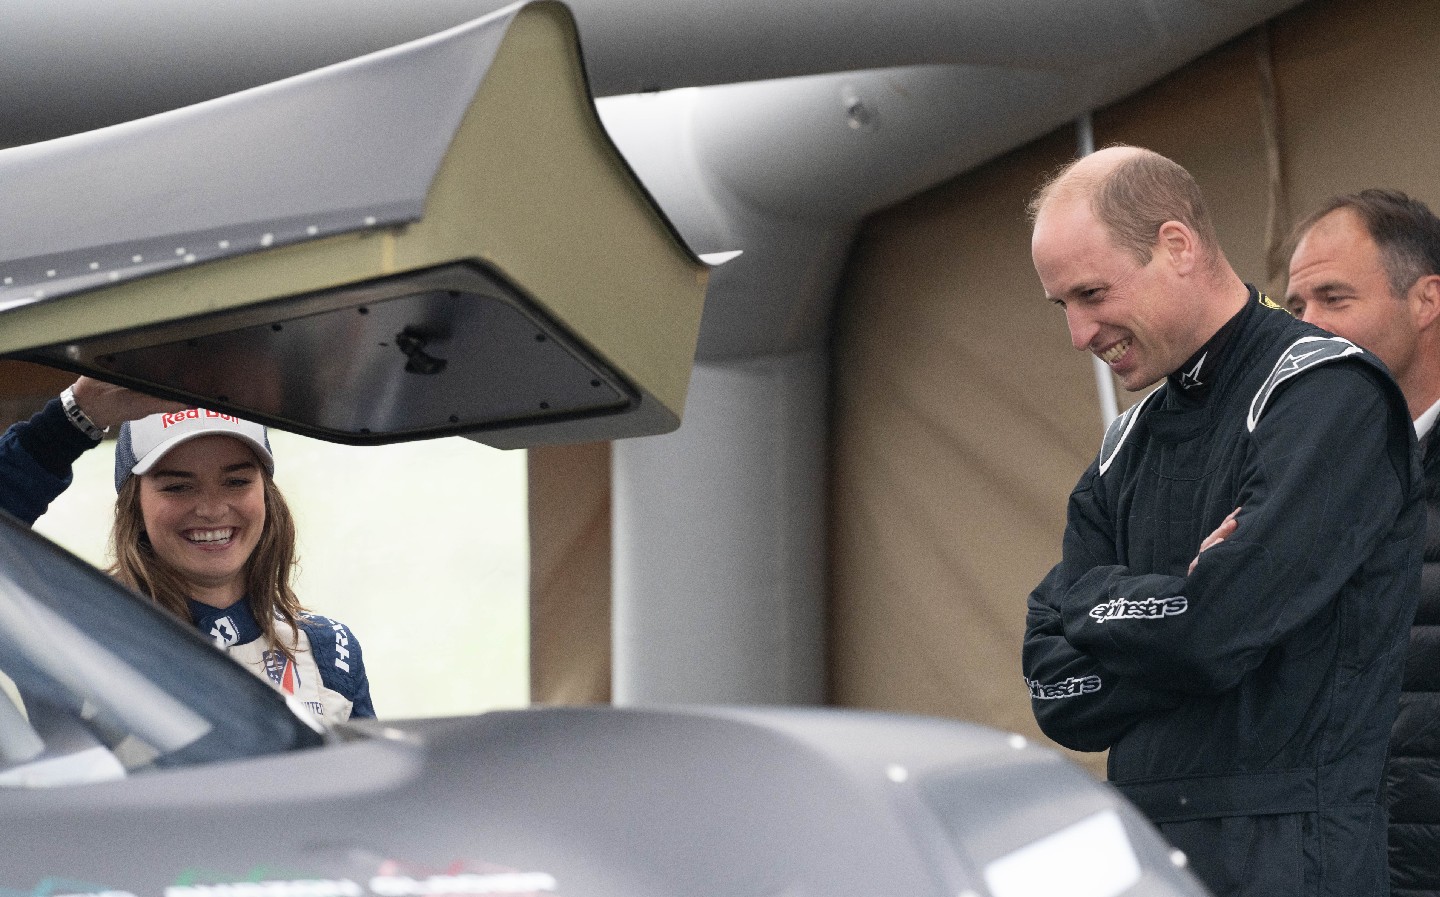 Prince William with Catie Munnings at Extreme E rally race test drive, Knockhill